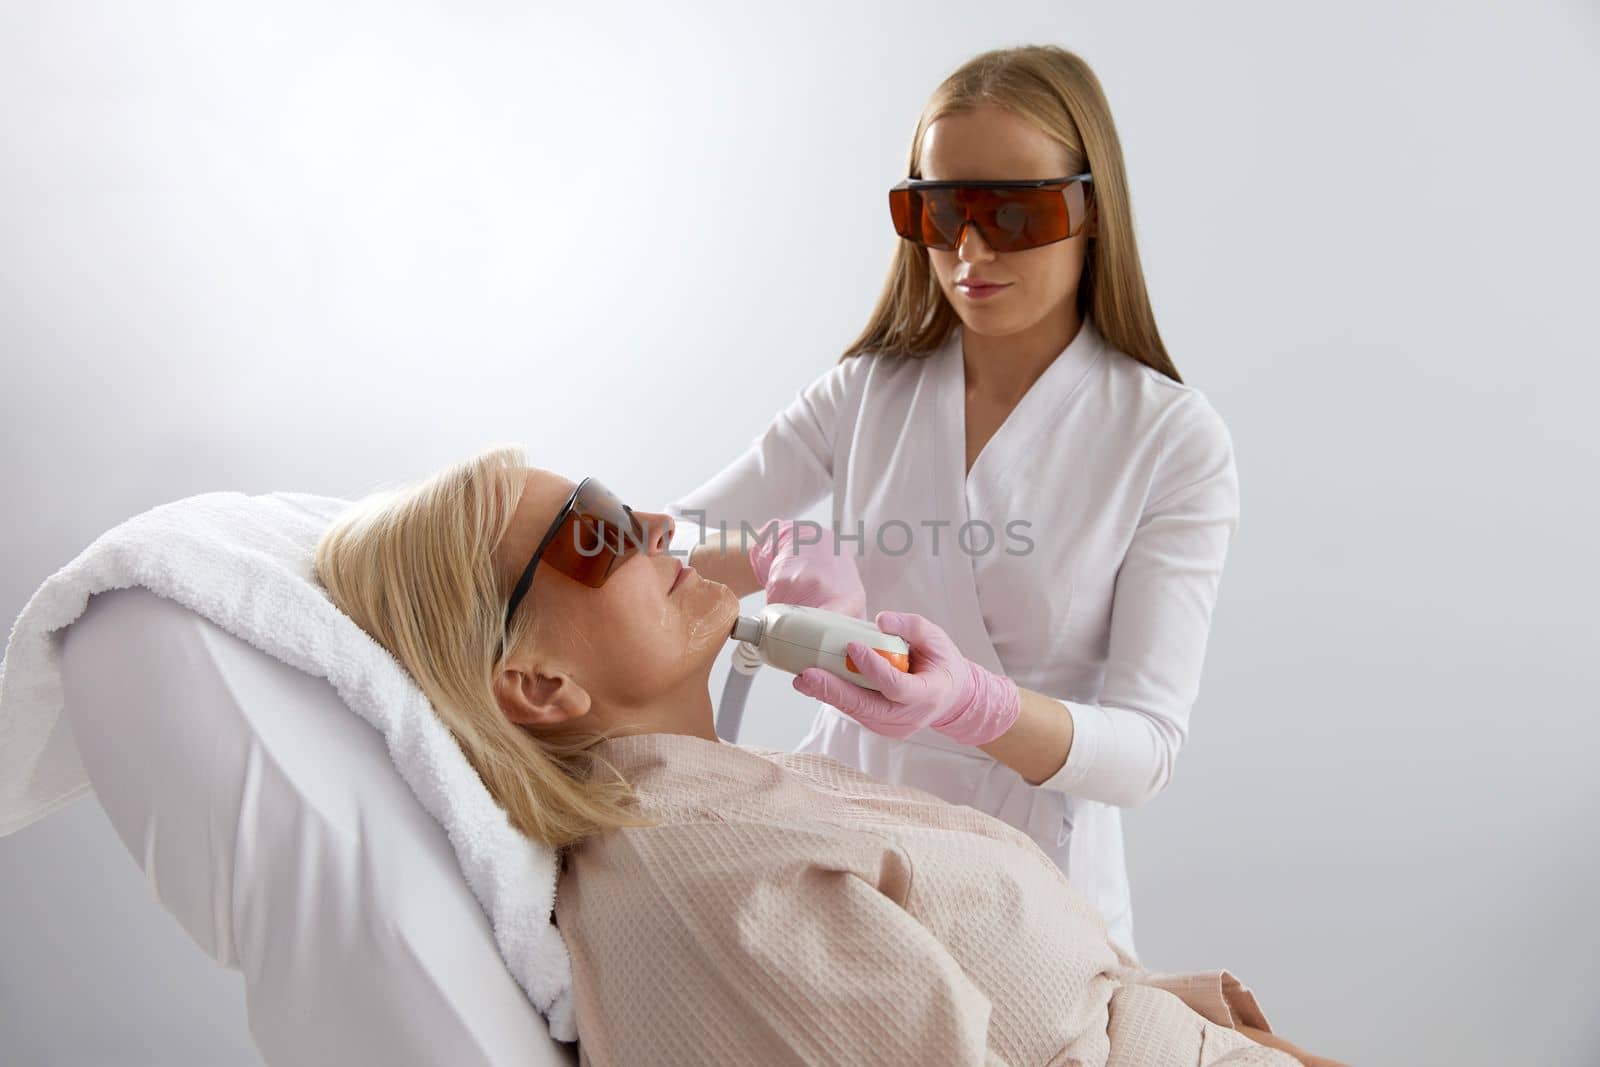 Woman receiving laser treatment in modern cosmetology clinic by Mariakray